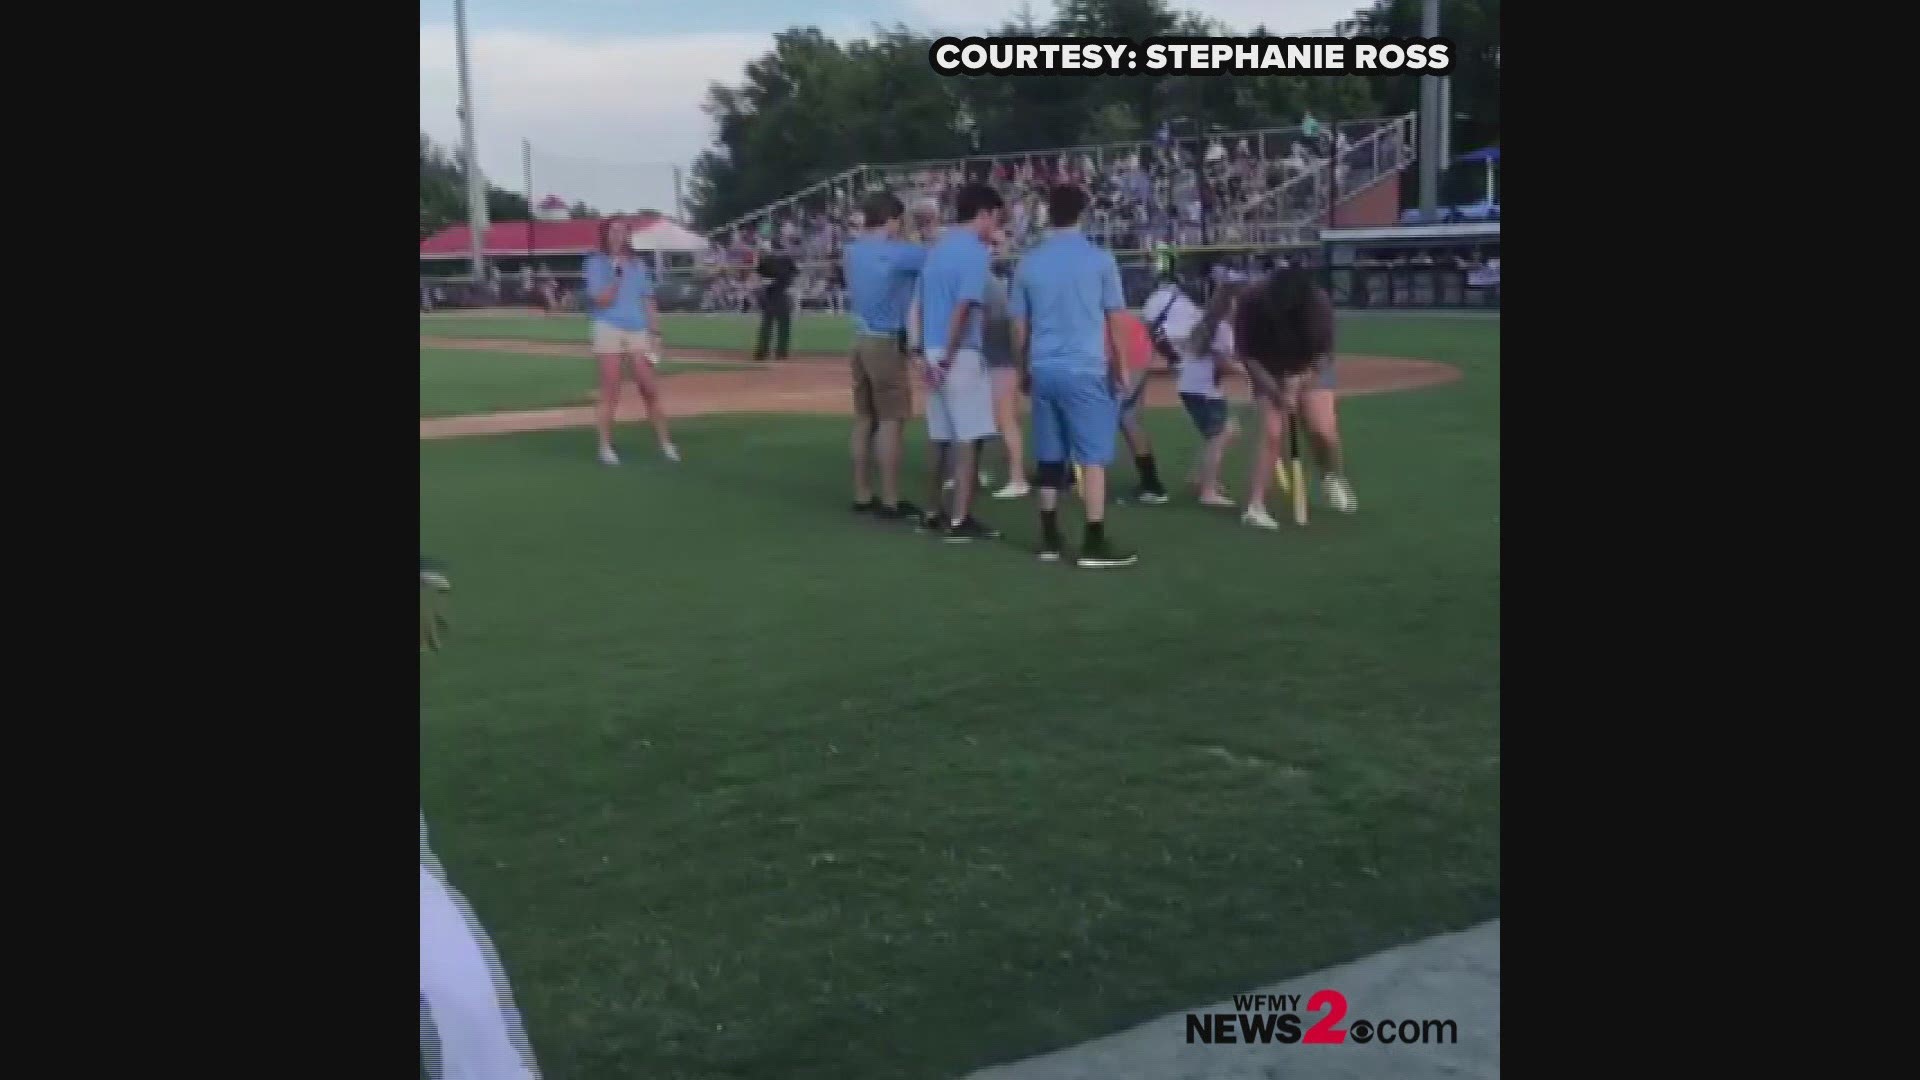 Army Staff Sergeant Jim Ross' grandchildren thought they were just playing a game of dizzy bat at the Burlington Royals game last Saturday, but when they finally stopped spinning, they saw Ross standing there in full uniform. Ross has been deployed for nearly a year, and surprised his family at the game Saturday.